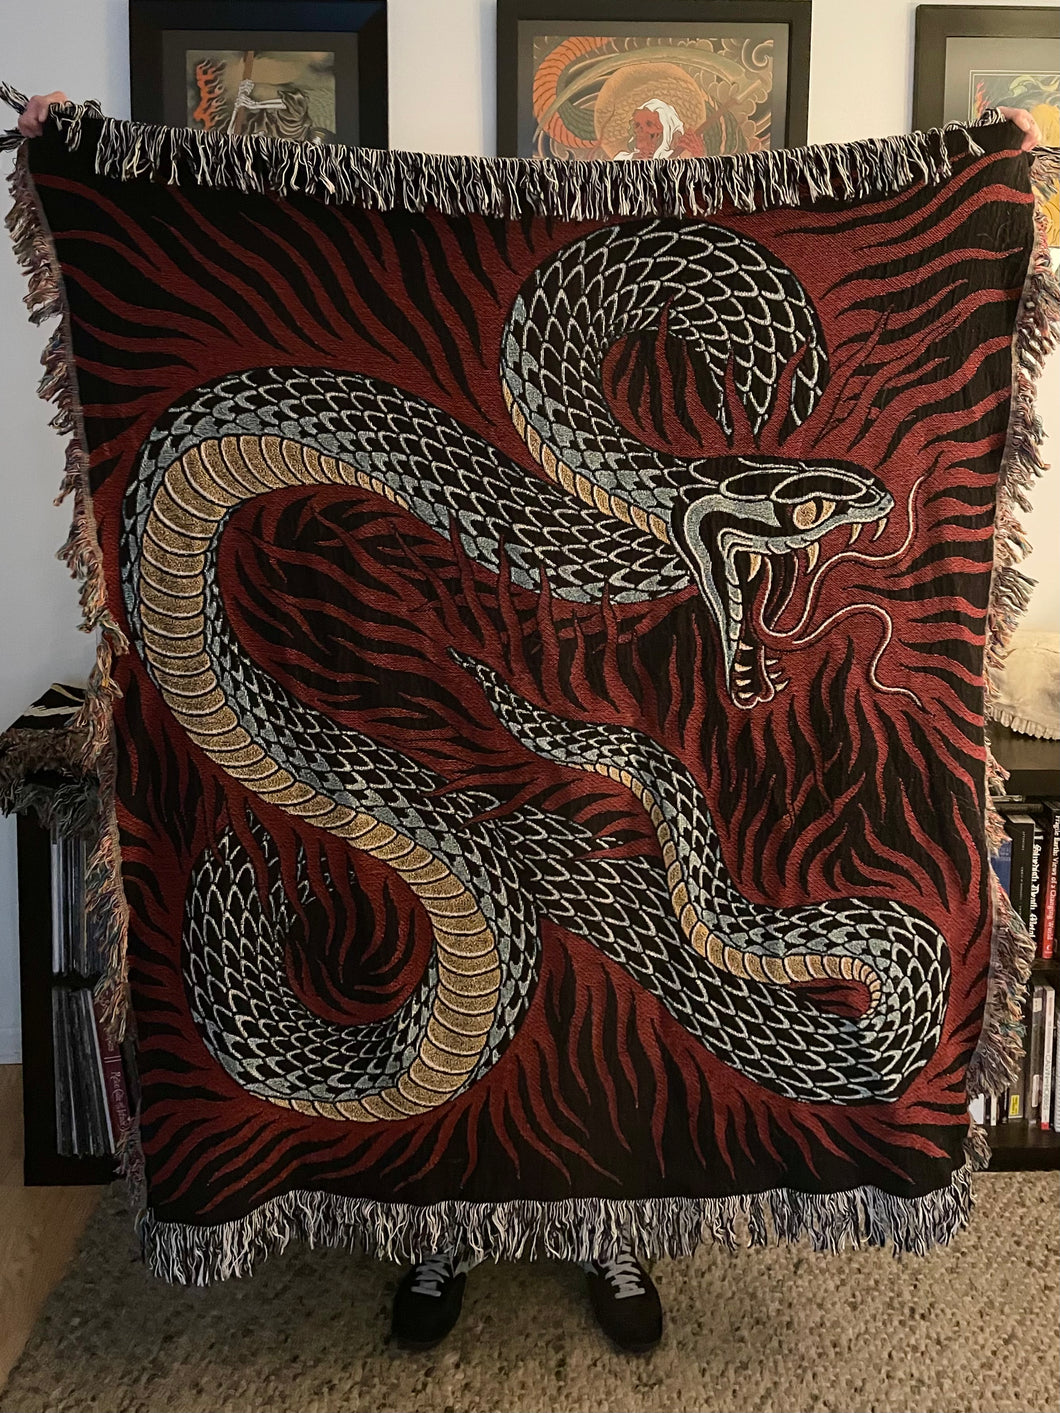 Kevin Leary - Cobra Woven Blanket